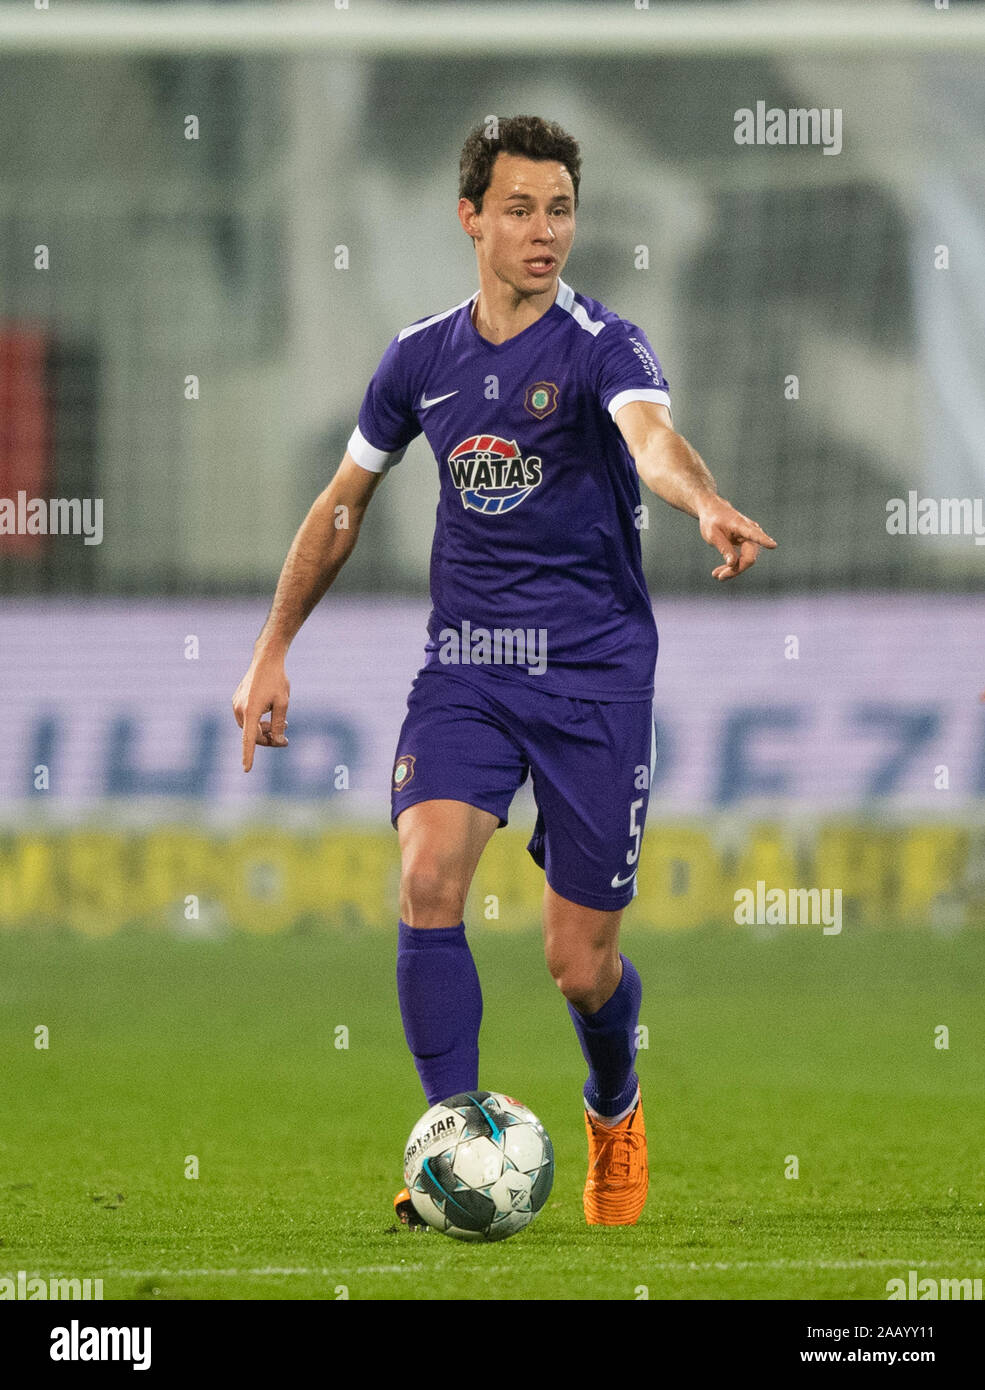 Aue, Germany. 22nd Nov, 2019. Soccer: 2nd Bundesliga, FC Erzgebirge Aue - FC St. Pauli, 14th matchday, in the Sparkassen-Erzgebirgsstadion. Aues Tom Baumgart plays the ball. Credit: Robert Michael/dpa-Zentralbild/dpa - IMPORTANT NOTE: In accordance with the requirements of the DFL Deutsche Fußball Liga or the DFB Deutscher Fußball-Bund, it is prohibited to use or have used photographs taken in the stadium and/or the match in the form of sequence images and/or video-like photo sequences./dpa/Alamy Live News Stock Photo